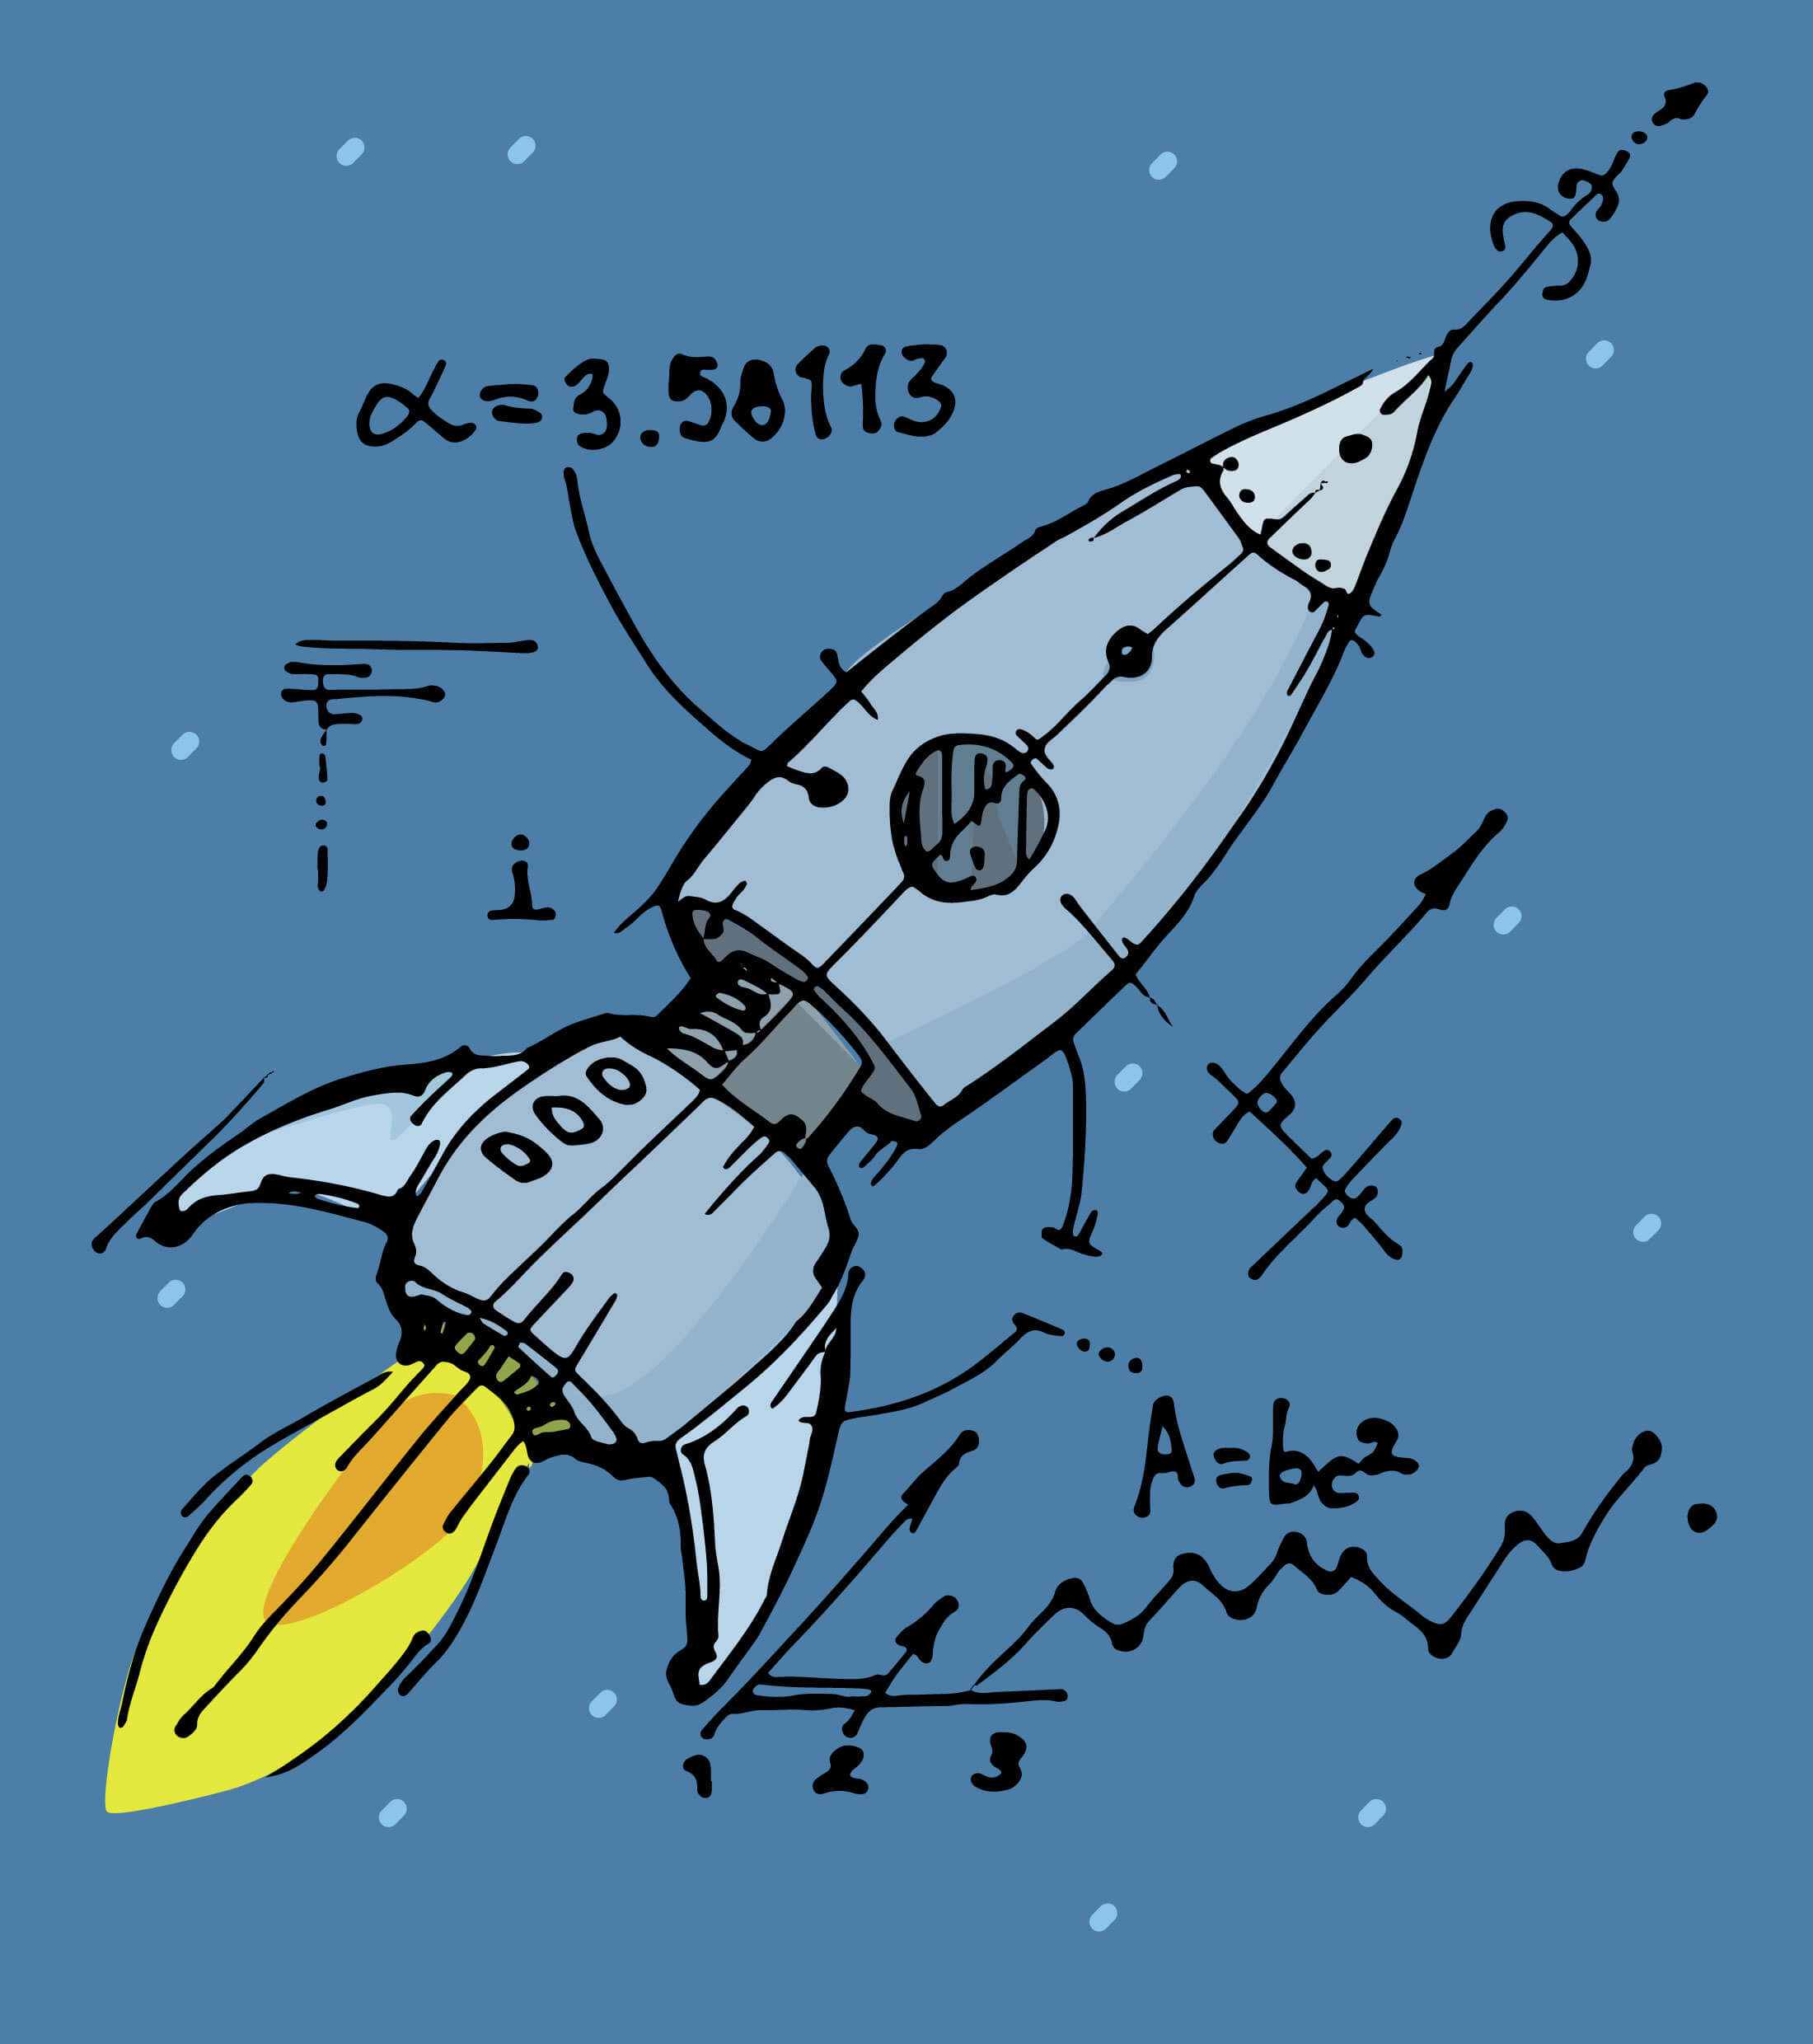 The physics of missiles. Illustration: shutterstock